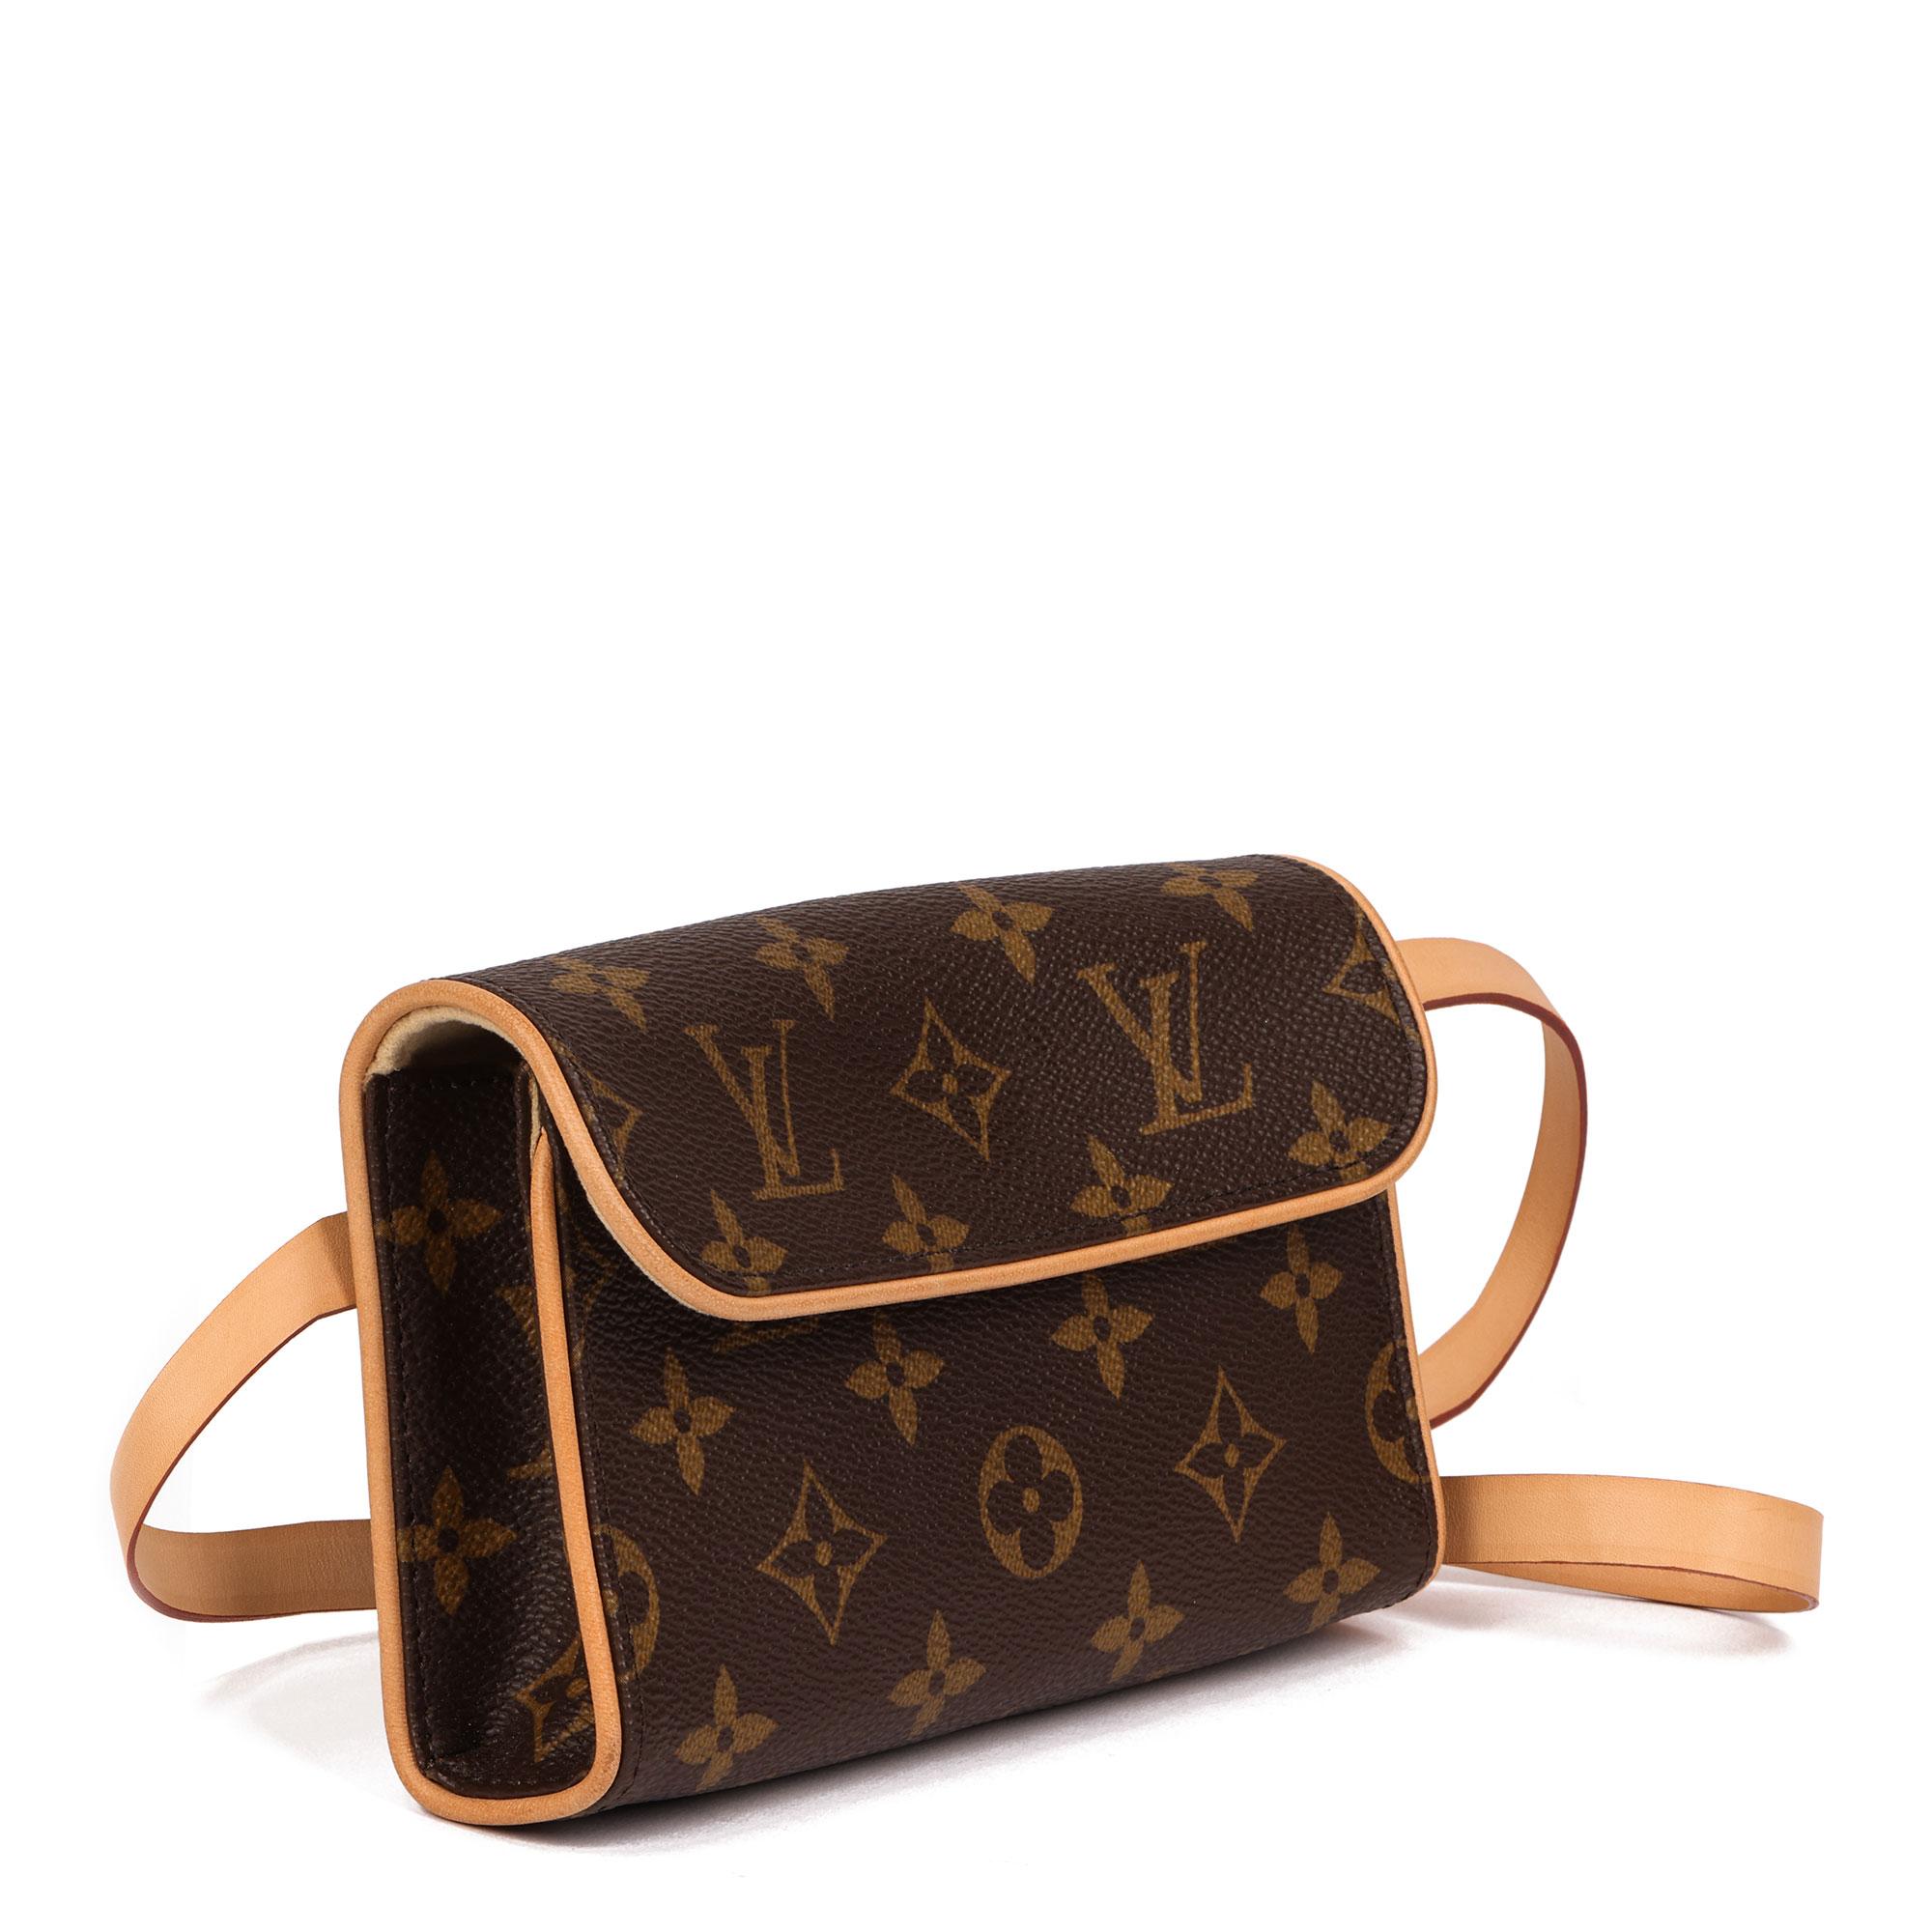 LOUIS VUITTON
Brown Coated Monogram Canvas & Vachetta Leather Pochette Florentine

Xupes Reference: HB4097
Serial Number: FL3097
Age (Circa): 2007
Accompanied By: Louis Vuitton Dust Bag
Authenticity Details: Date Stamp (Made in France)
Gender: